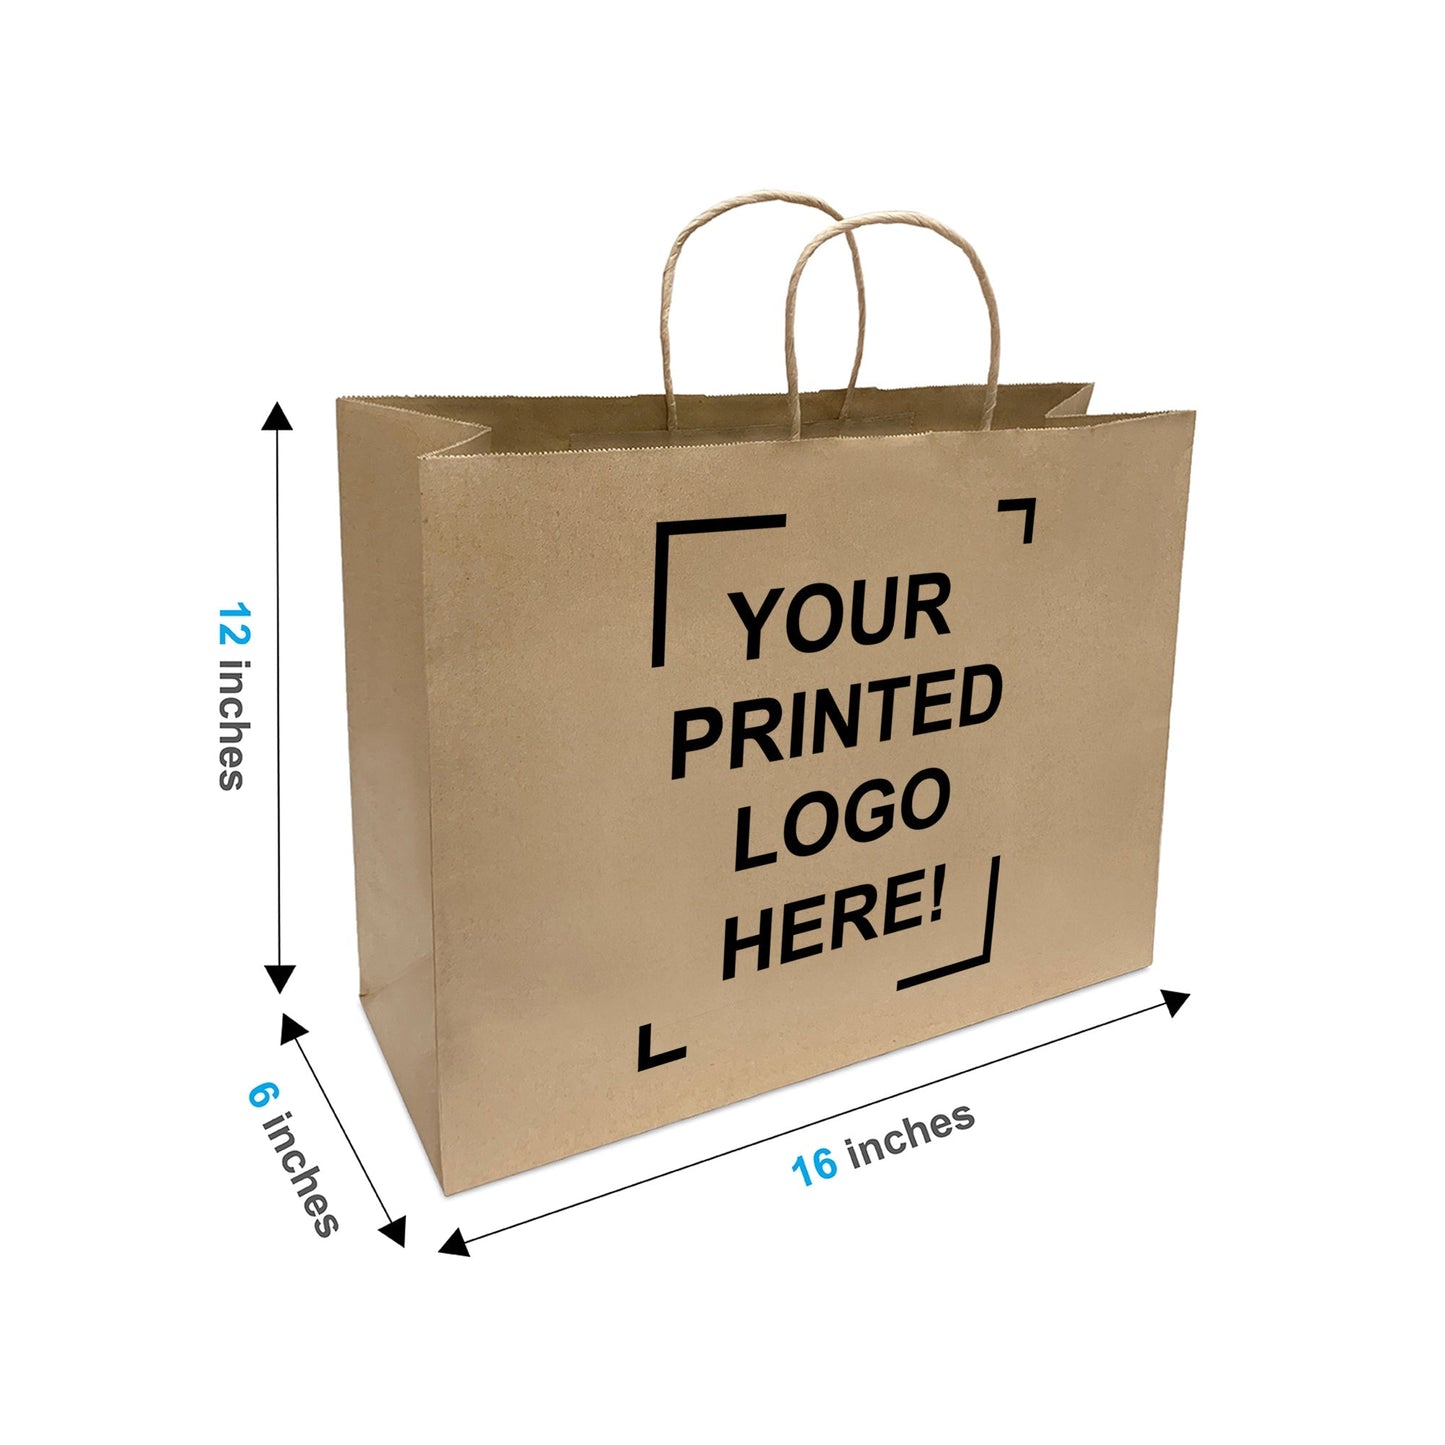 250pcs 2 Sides Custom Print Vogue 16x6x12 inches Kraft Paper Bags Twisted Handles; $0.96/pc, Full Color Printed in North America